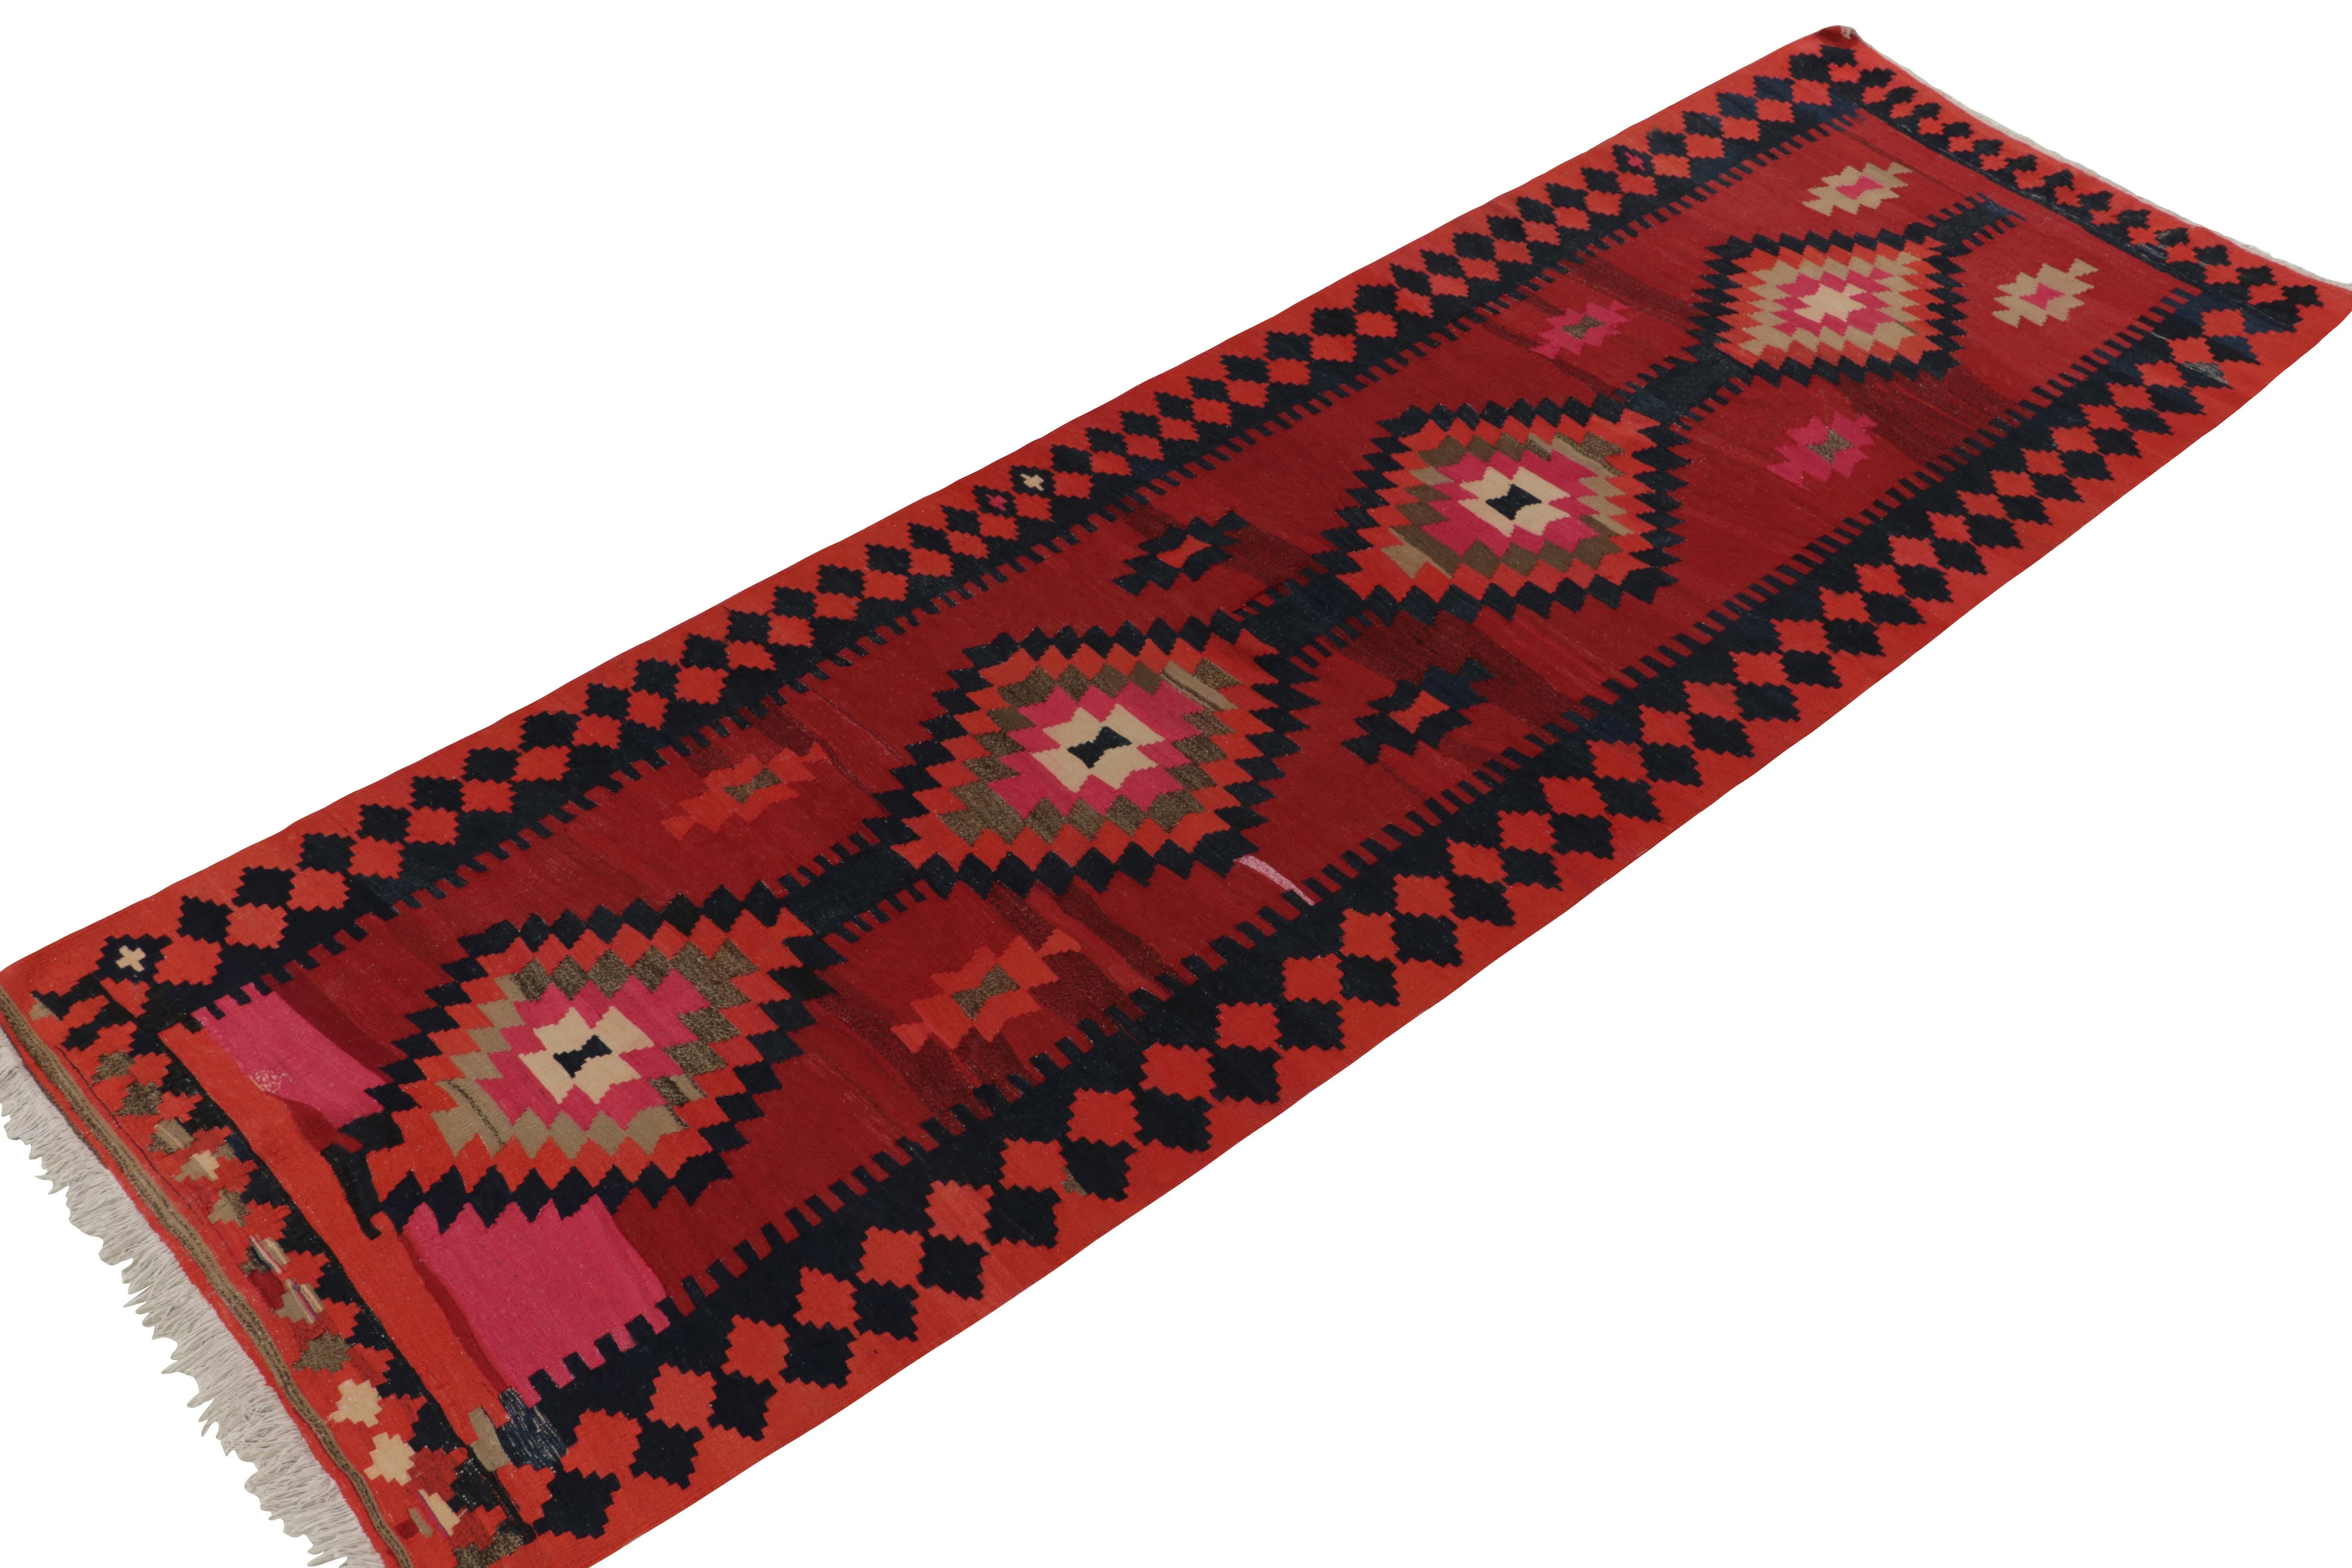 Handwoven in wool circa 1920-1930, this 4x12 antique Persian Kilim exemplifies the richest colors and most classic tribal aesthetic alike. This particular piece enjoys a serrated field pattern in rich red and vibrant pink, punctuated by a rare